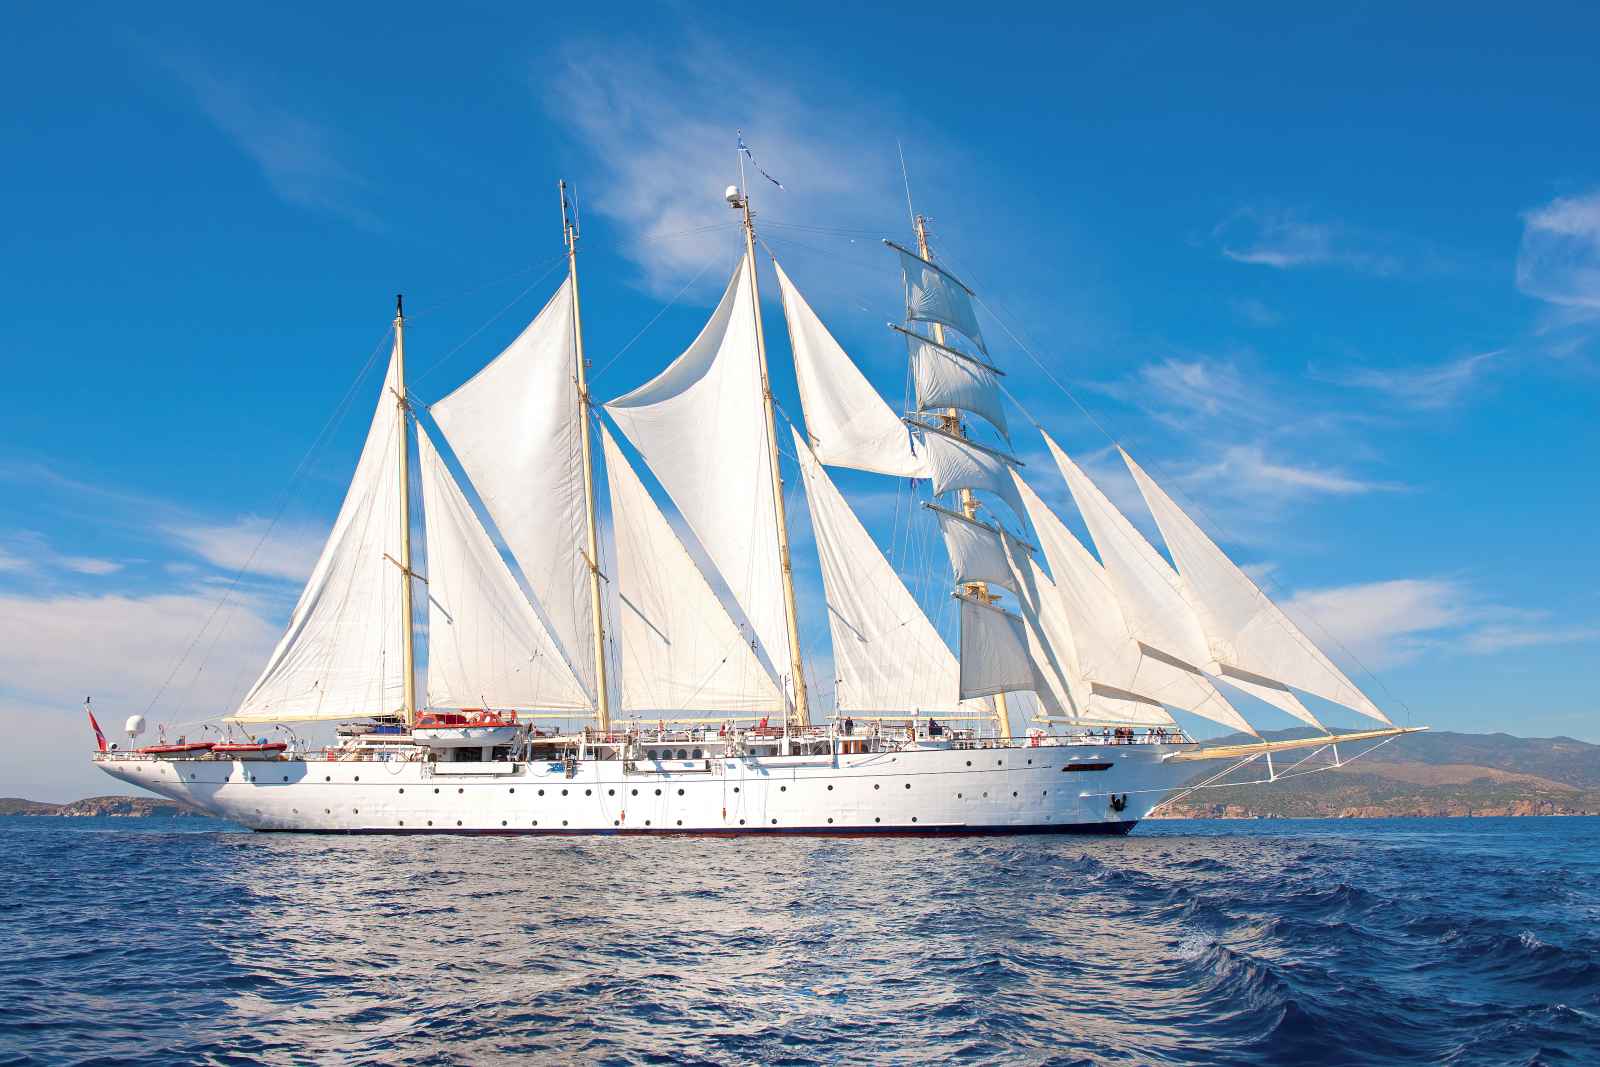 Le Star Flyer, Star Clippers